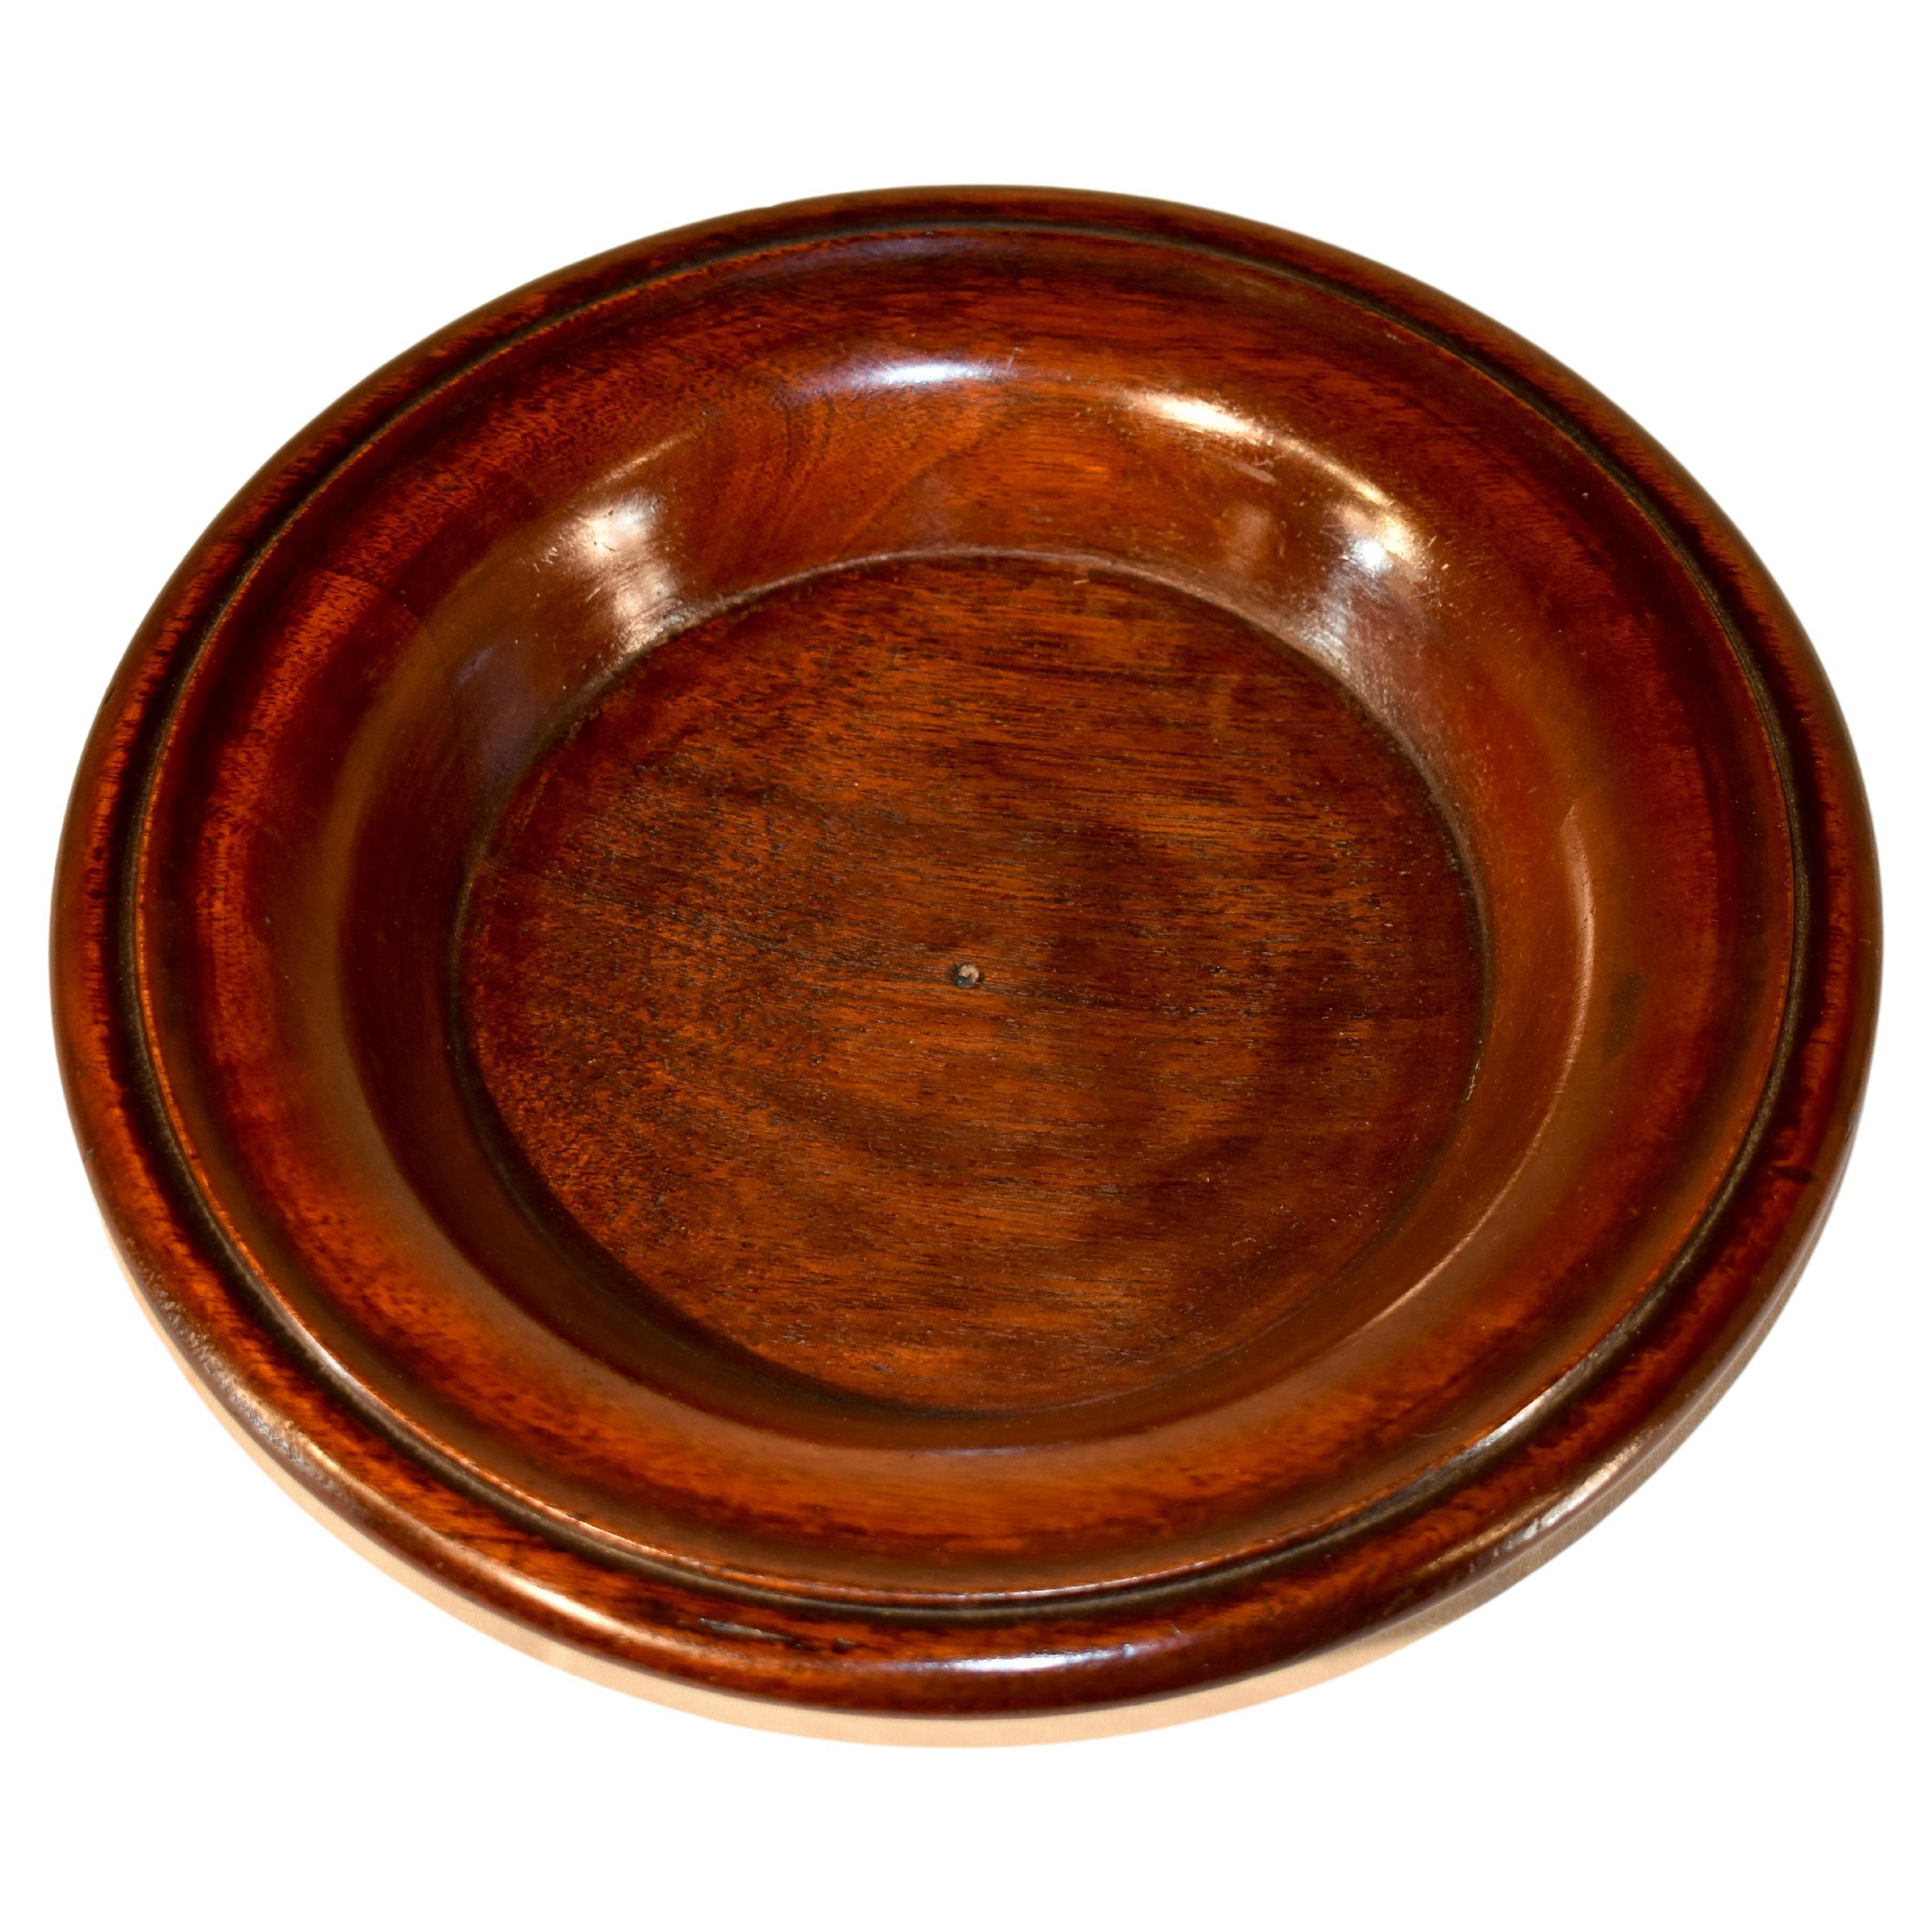 Edwardian oak hand turned bowl, c. 1900 from England.  It is made from lovely figured wood and has a gorgeous patina.  Very useful for anywhere in a house!